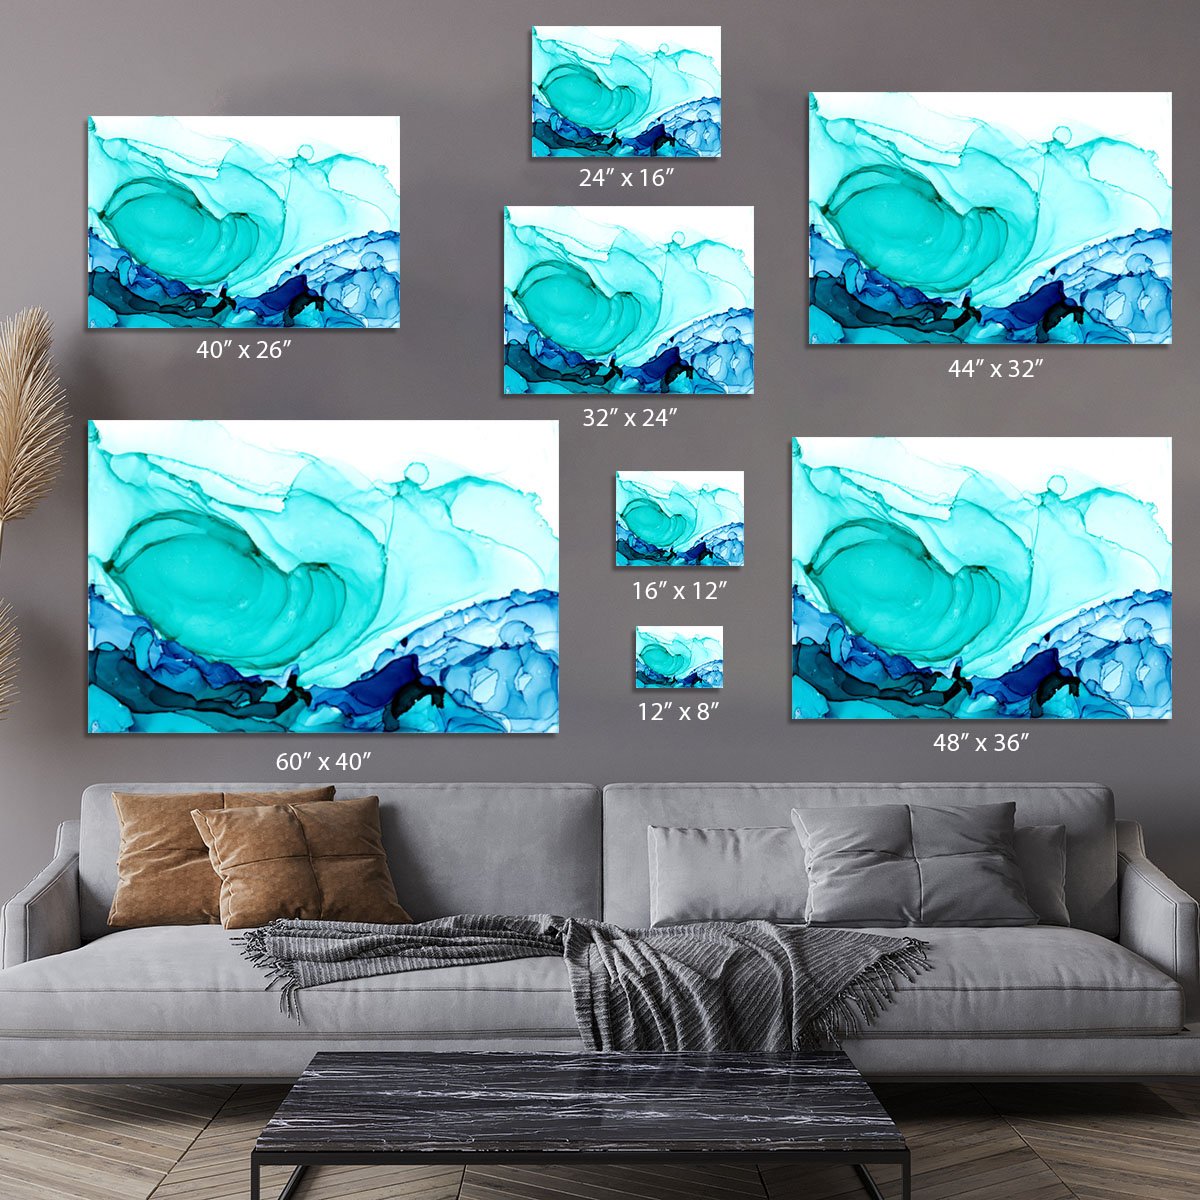 Cracked Blue and Teal Marble Canvas Print or Poster